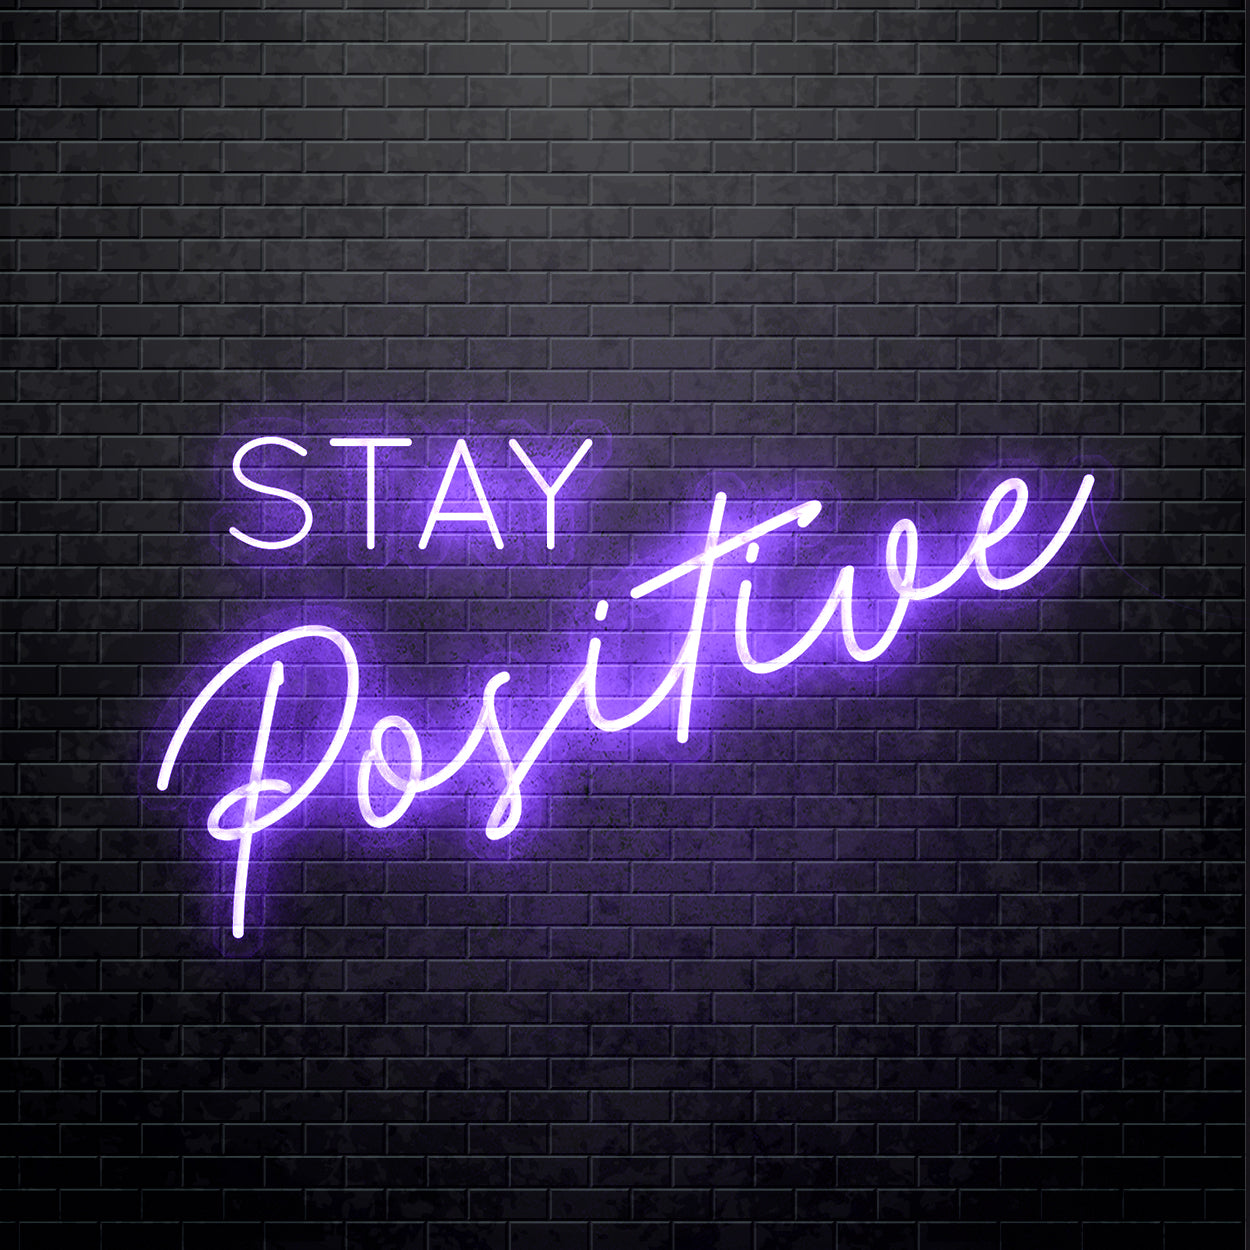 LED Neon sign - Stay Positive